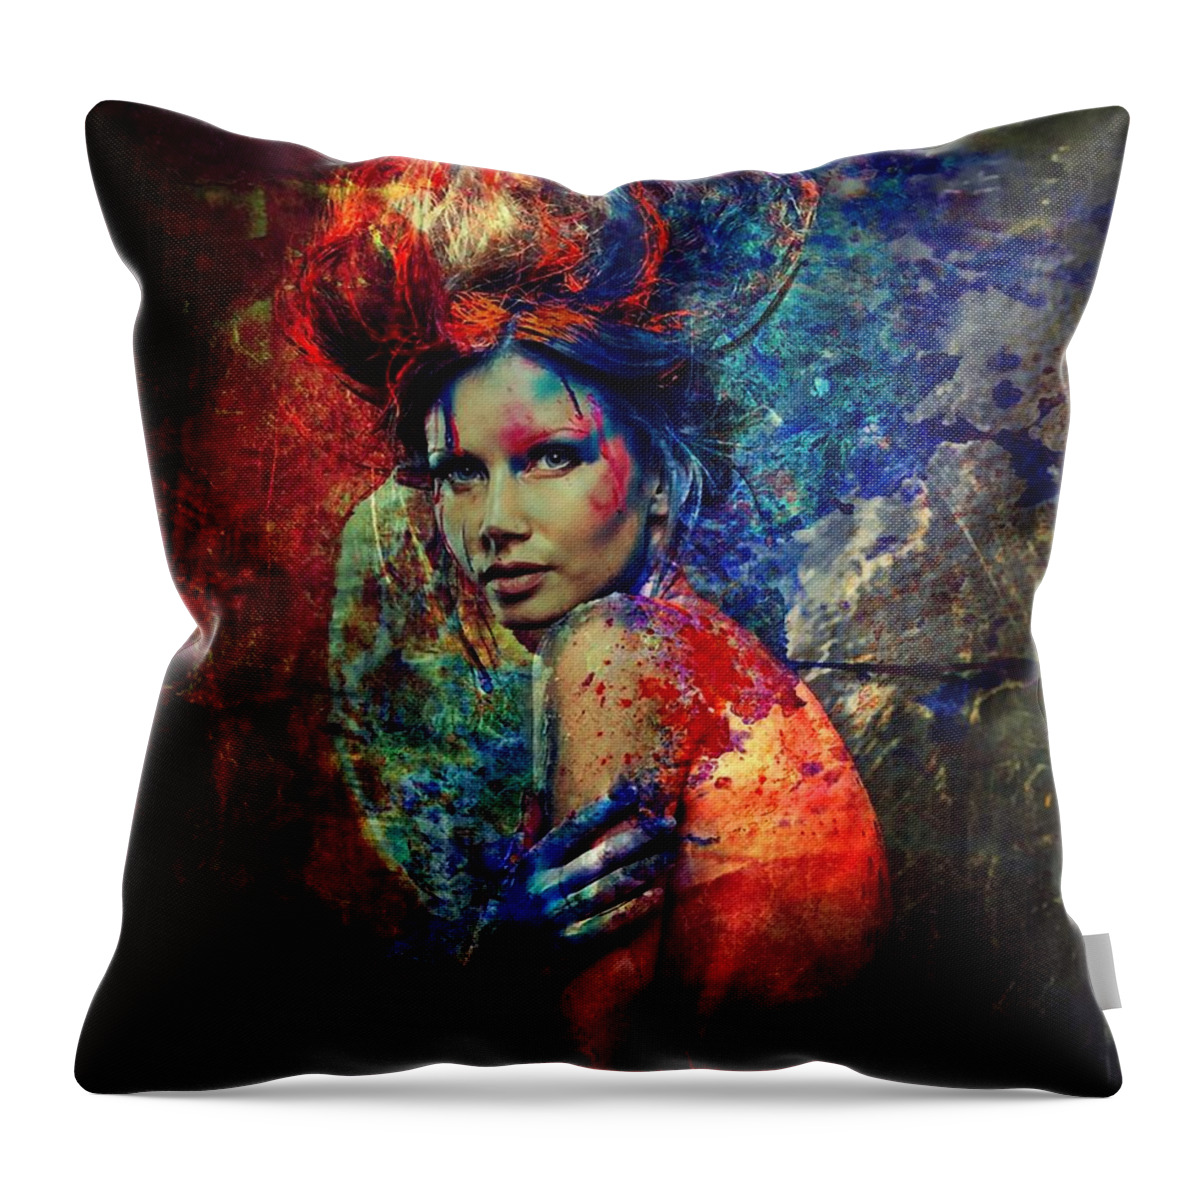 Nymph Throw Pillow featuring the digital art Nymph of Creativity 2 by Lilia D